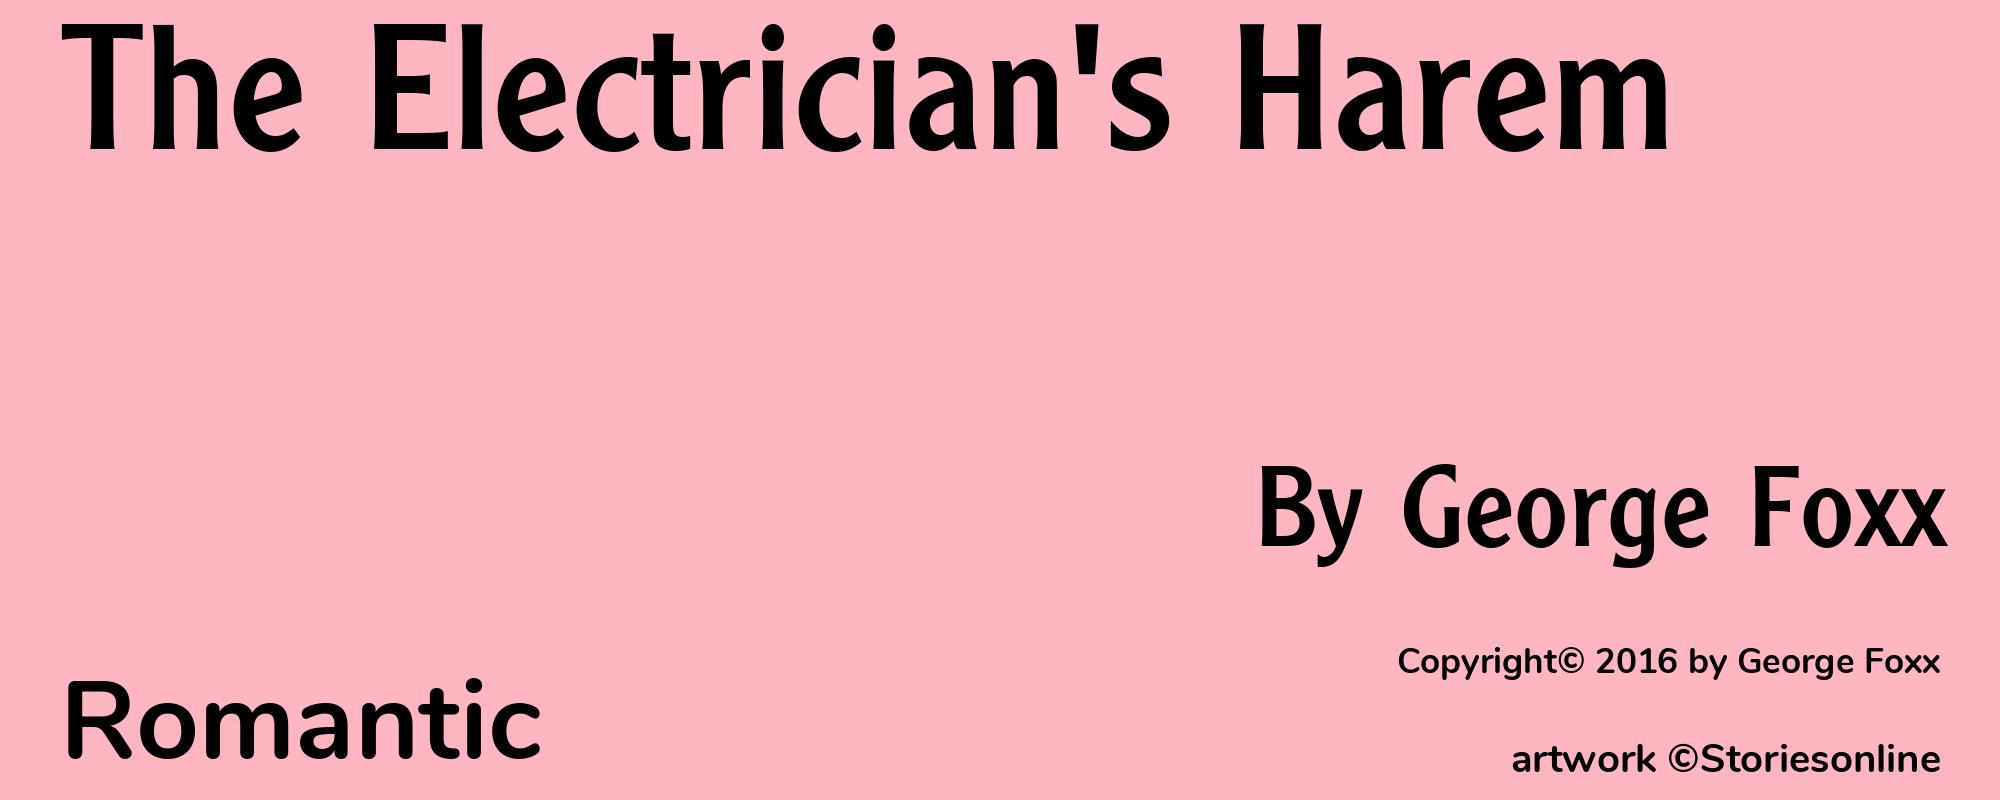 The Electrician's Harem - Cover